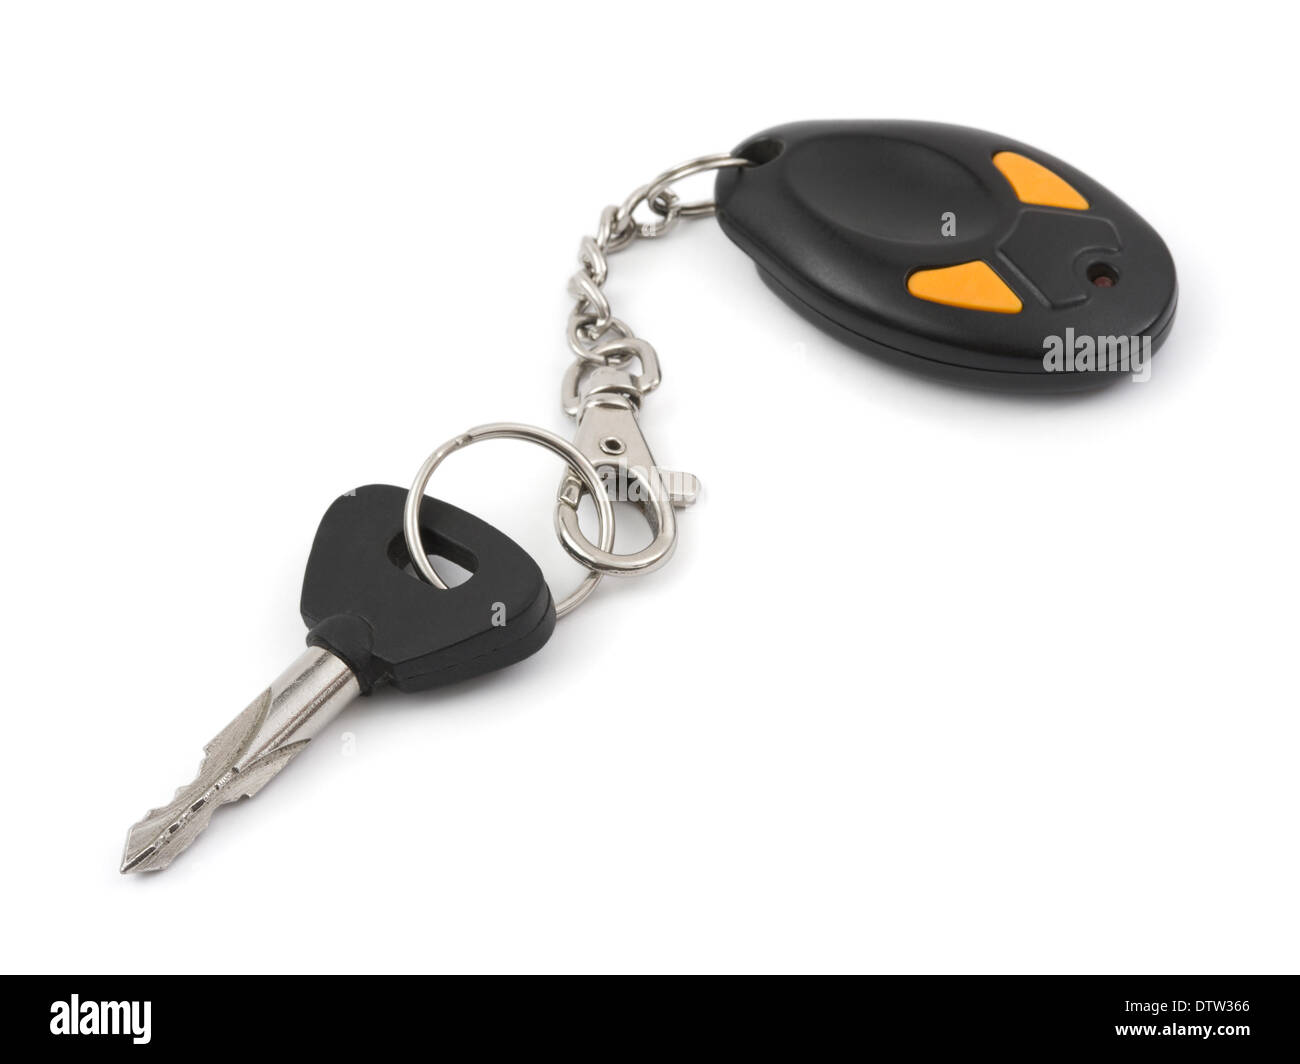 Car key and remote control Stock Photo